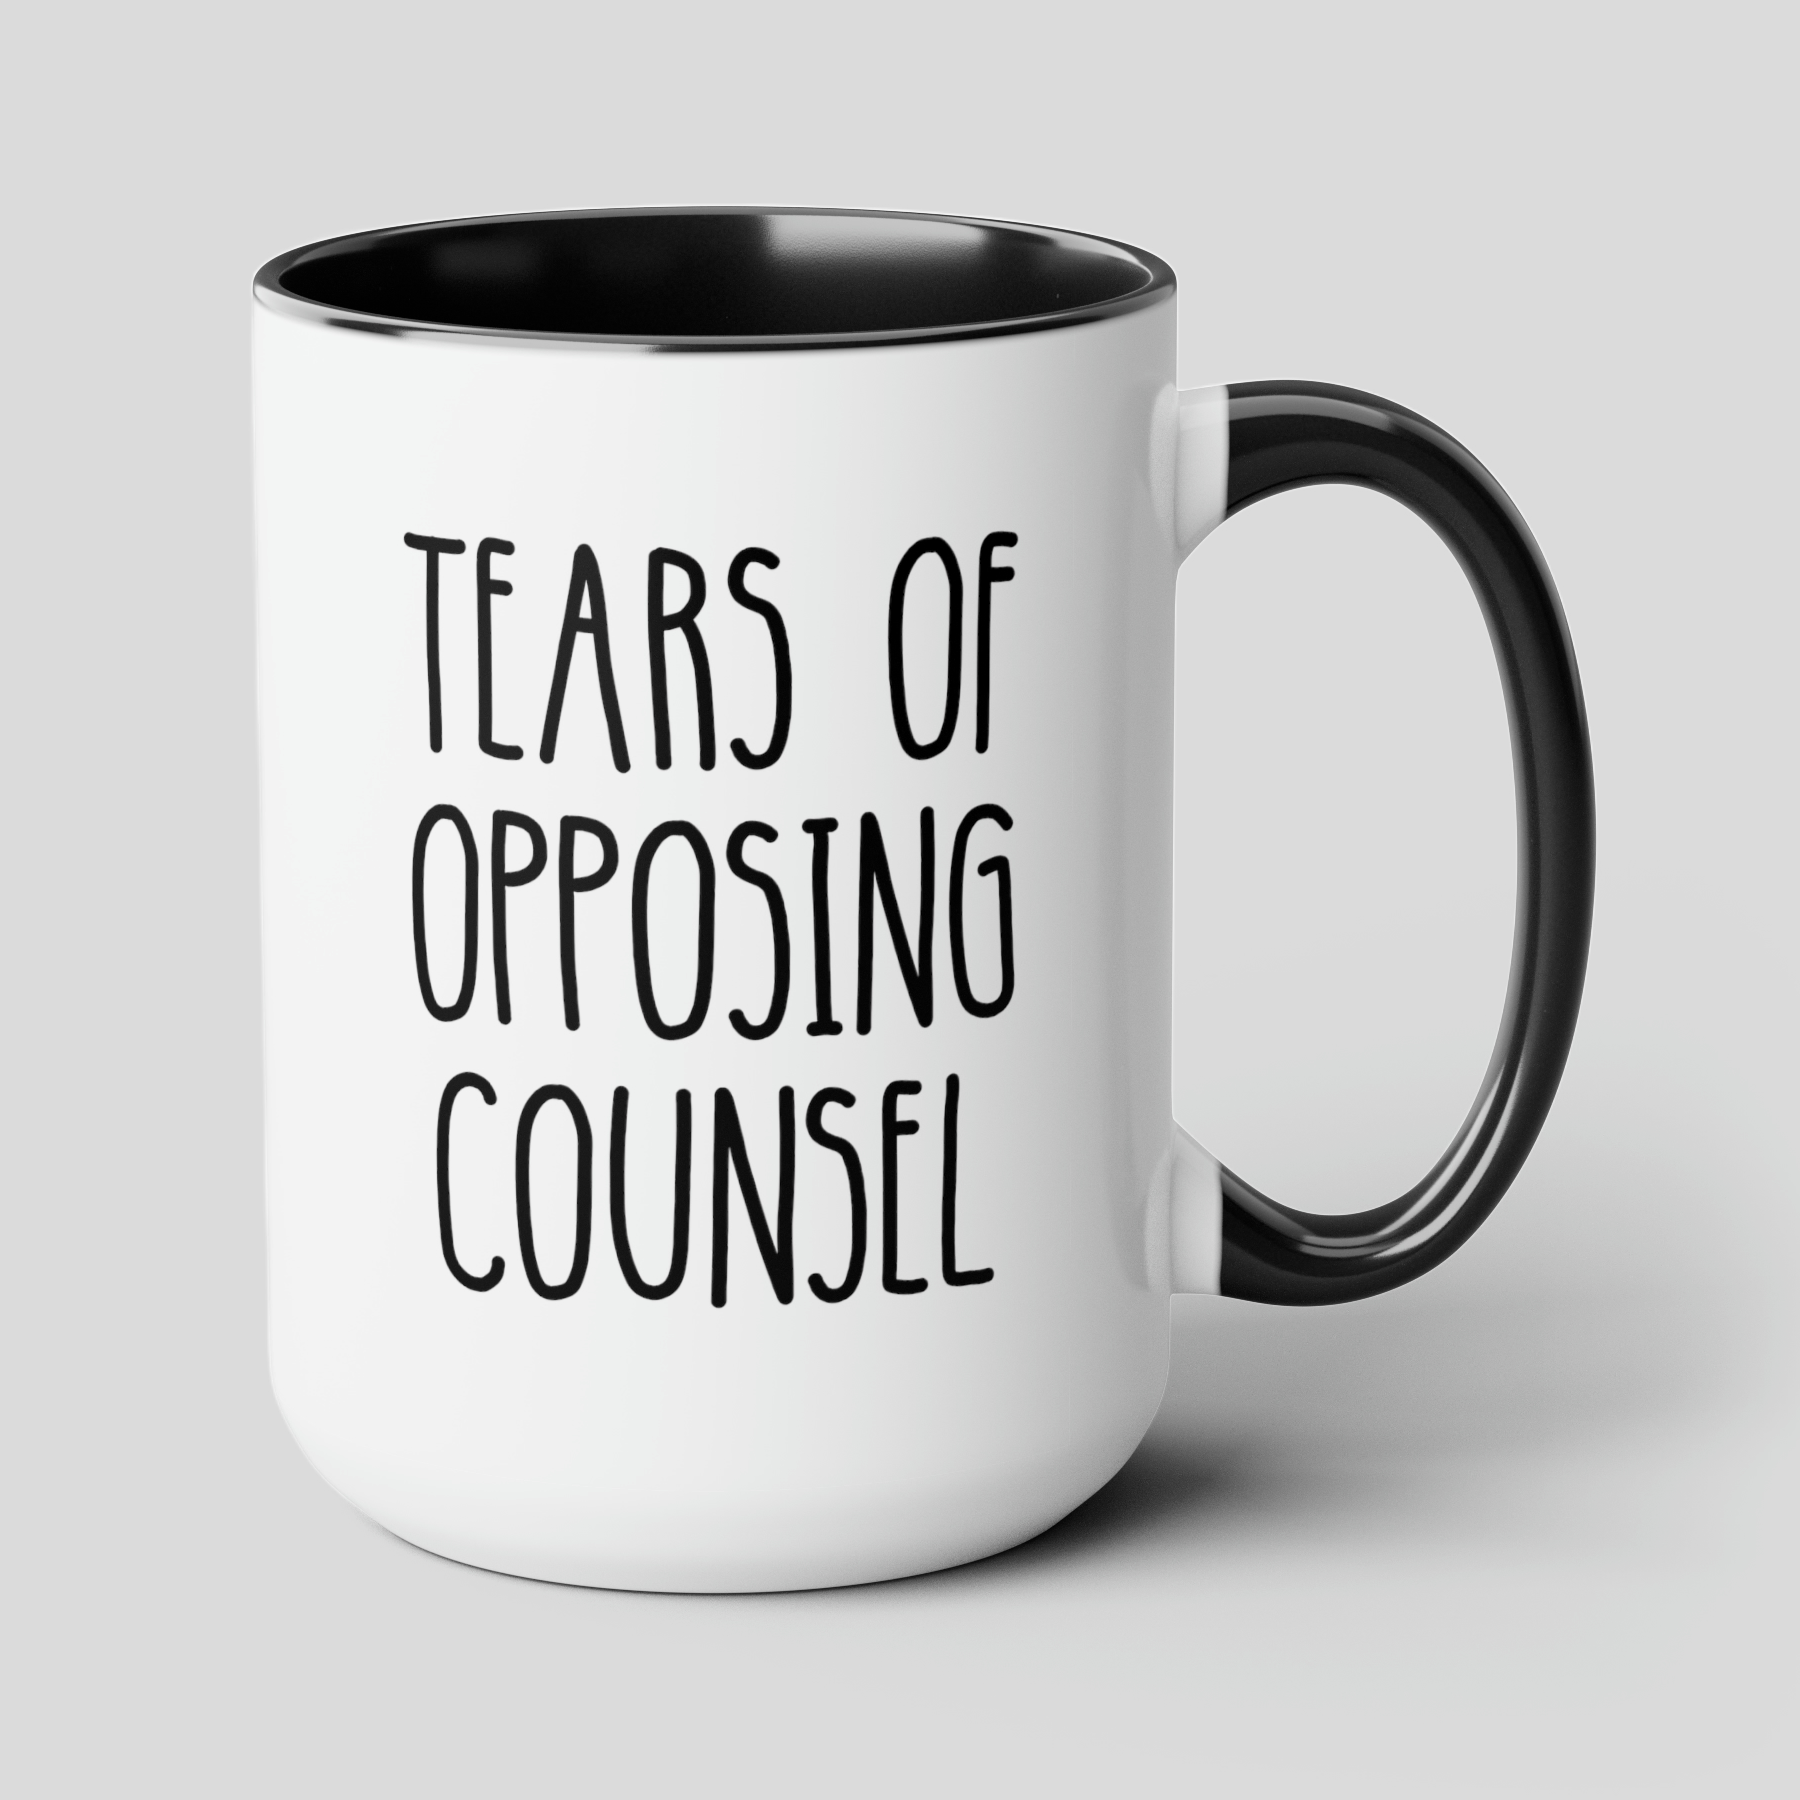 Tears Of Opposing Counsel 15oz white with black accent funny large coffee mug gift for lawyer law student graduation solicitor attorney prosecutor waveywares wavey wares wavywares wavy wares cover